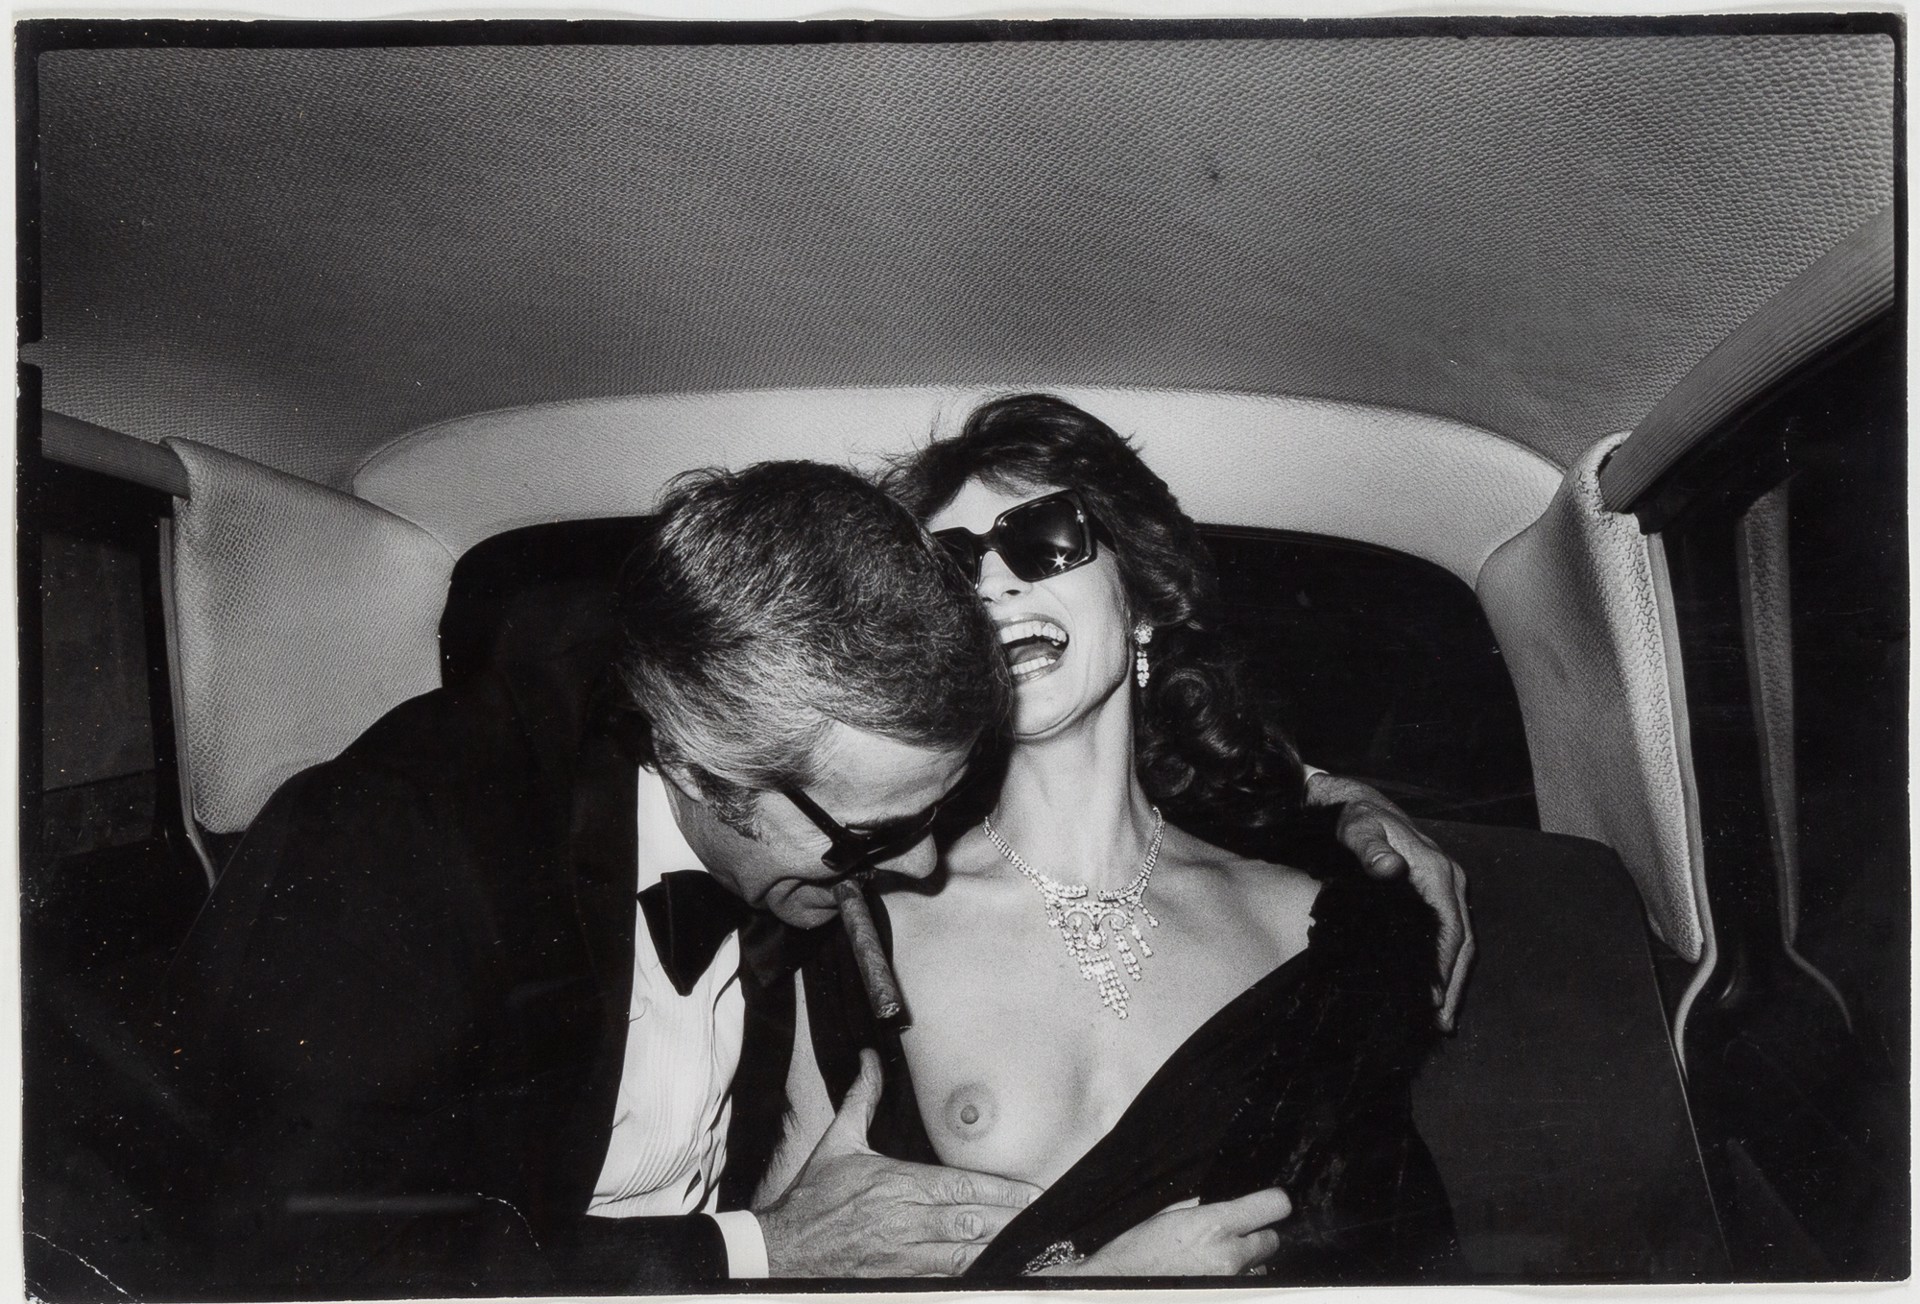 By-product of an advertising sitting by Helmut Newton